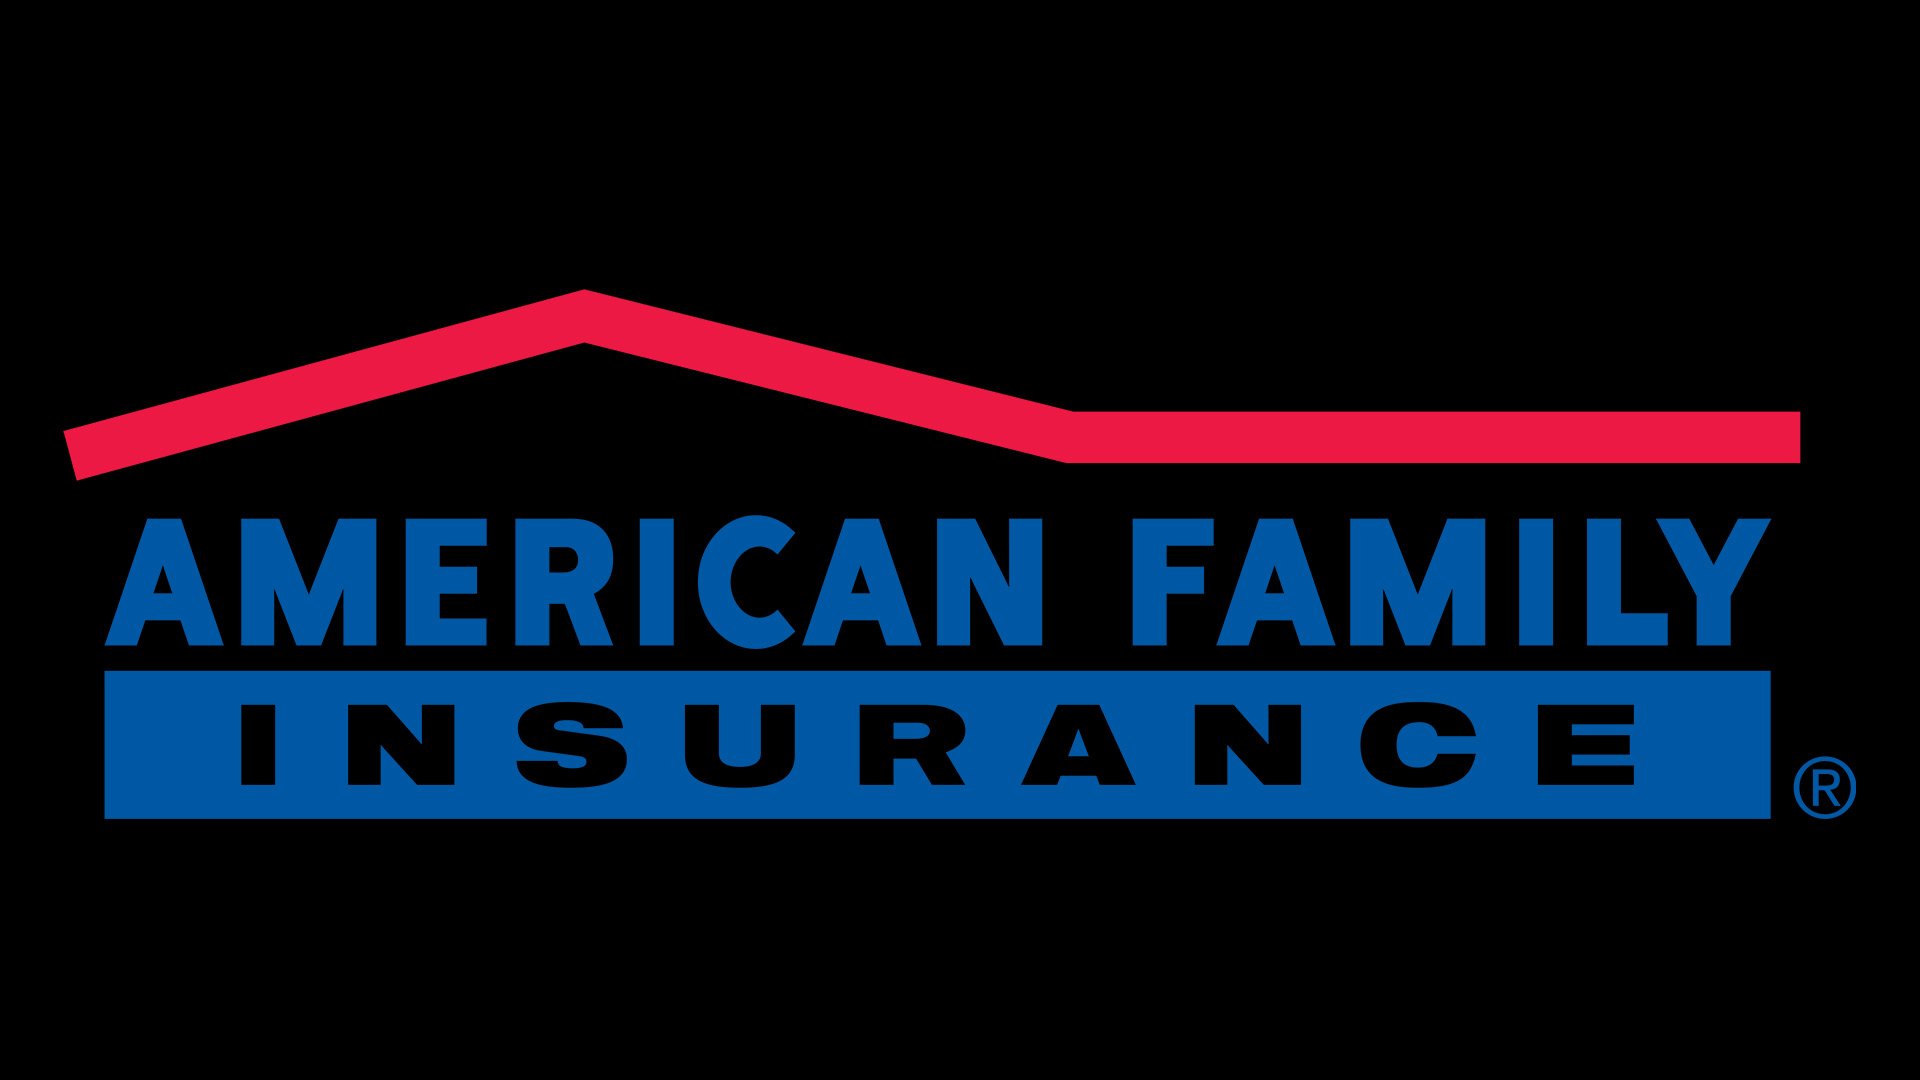 Meaning American Family Insurance logo and symbol | history and evolution1920 x 1080